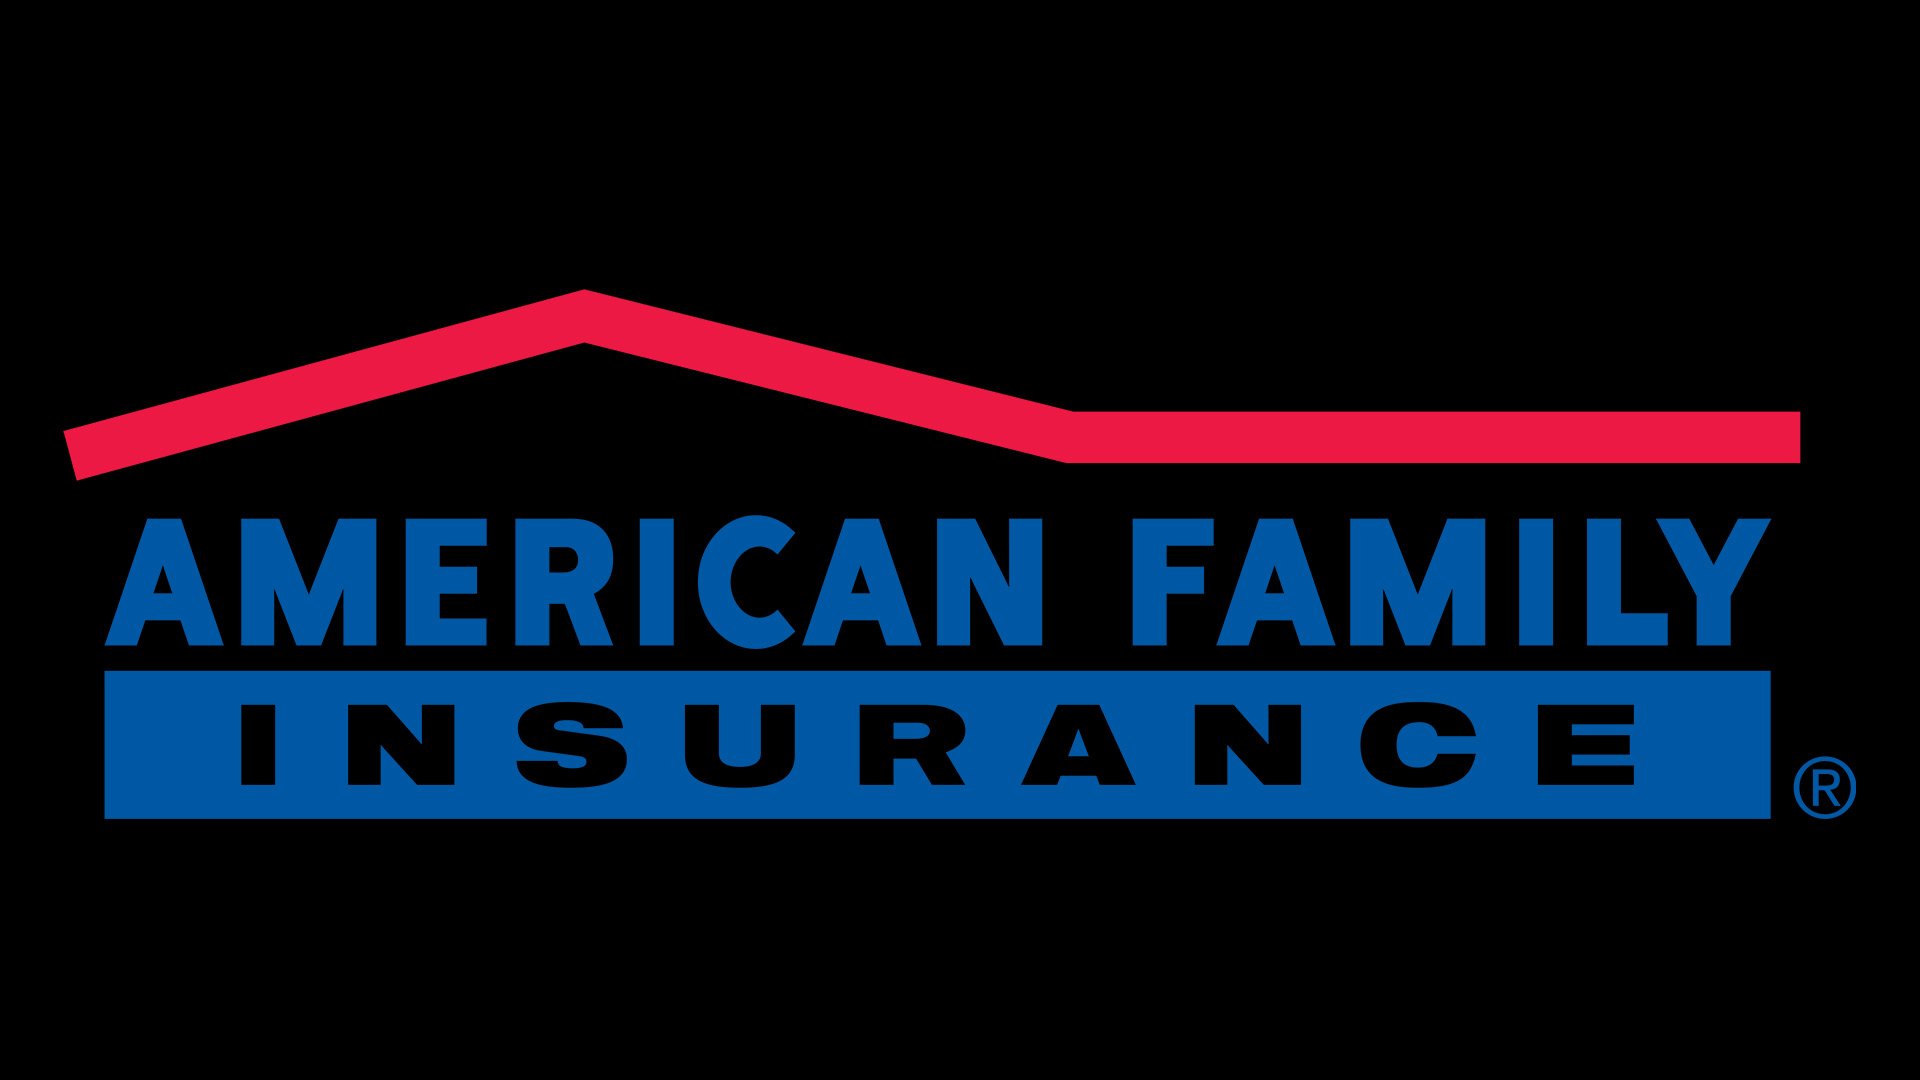 Meaning American Family Insurance logo and symbol | history and evolution1920 x 1080